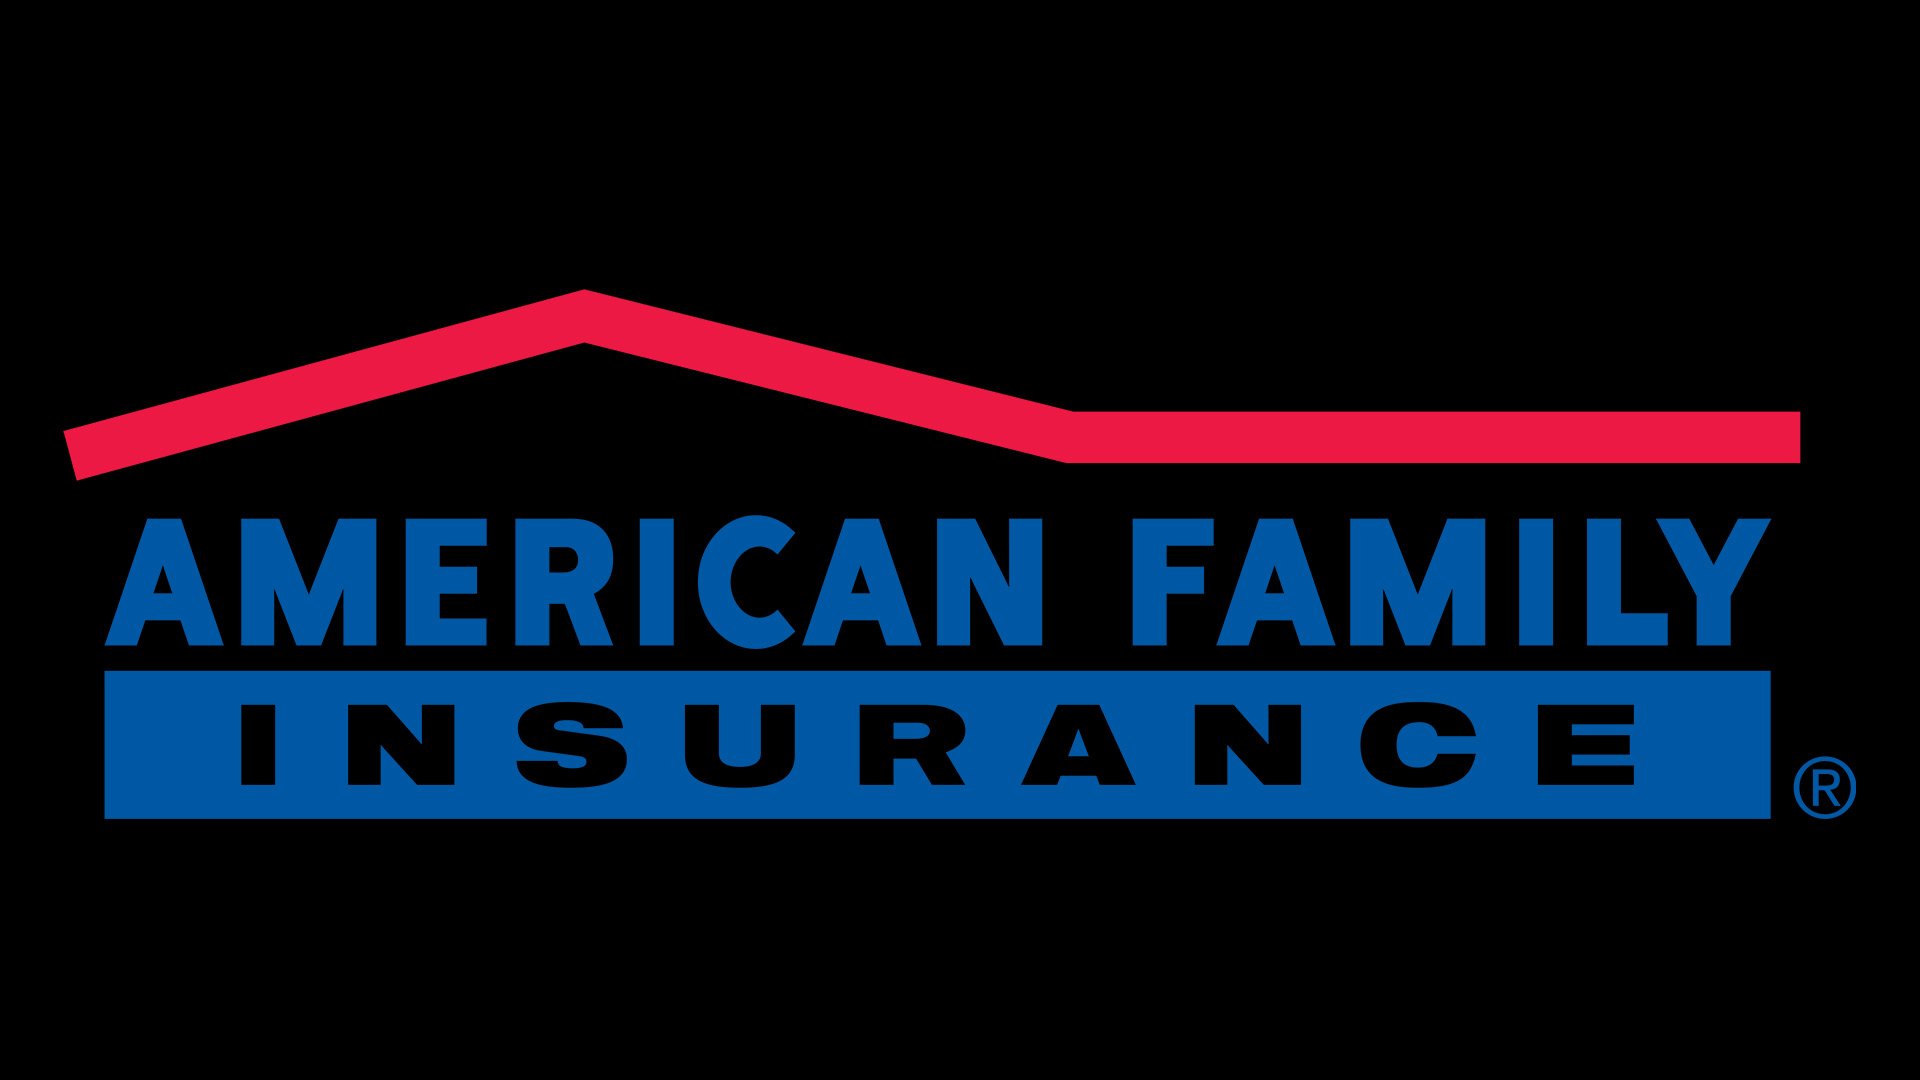 Meaning American Family Insurance logo and symbol | history and evolution1920 x 1080